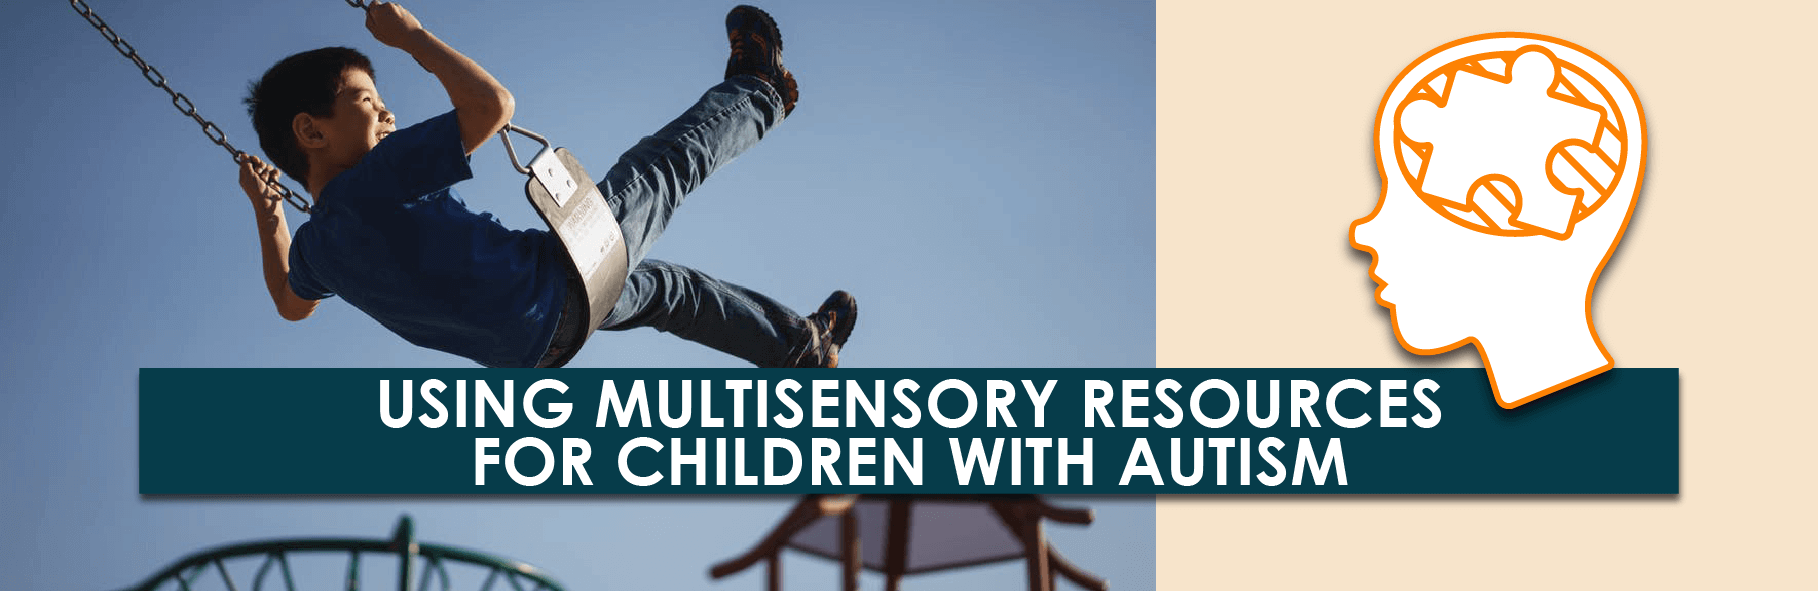 Using Multisensory Resources for Children with Autism